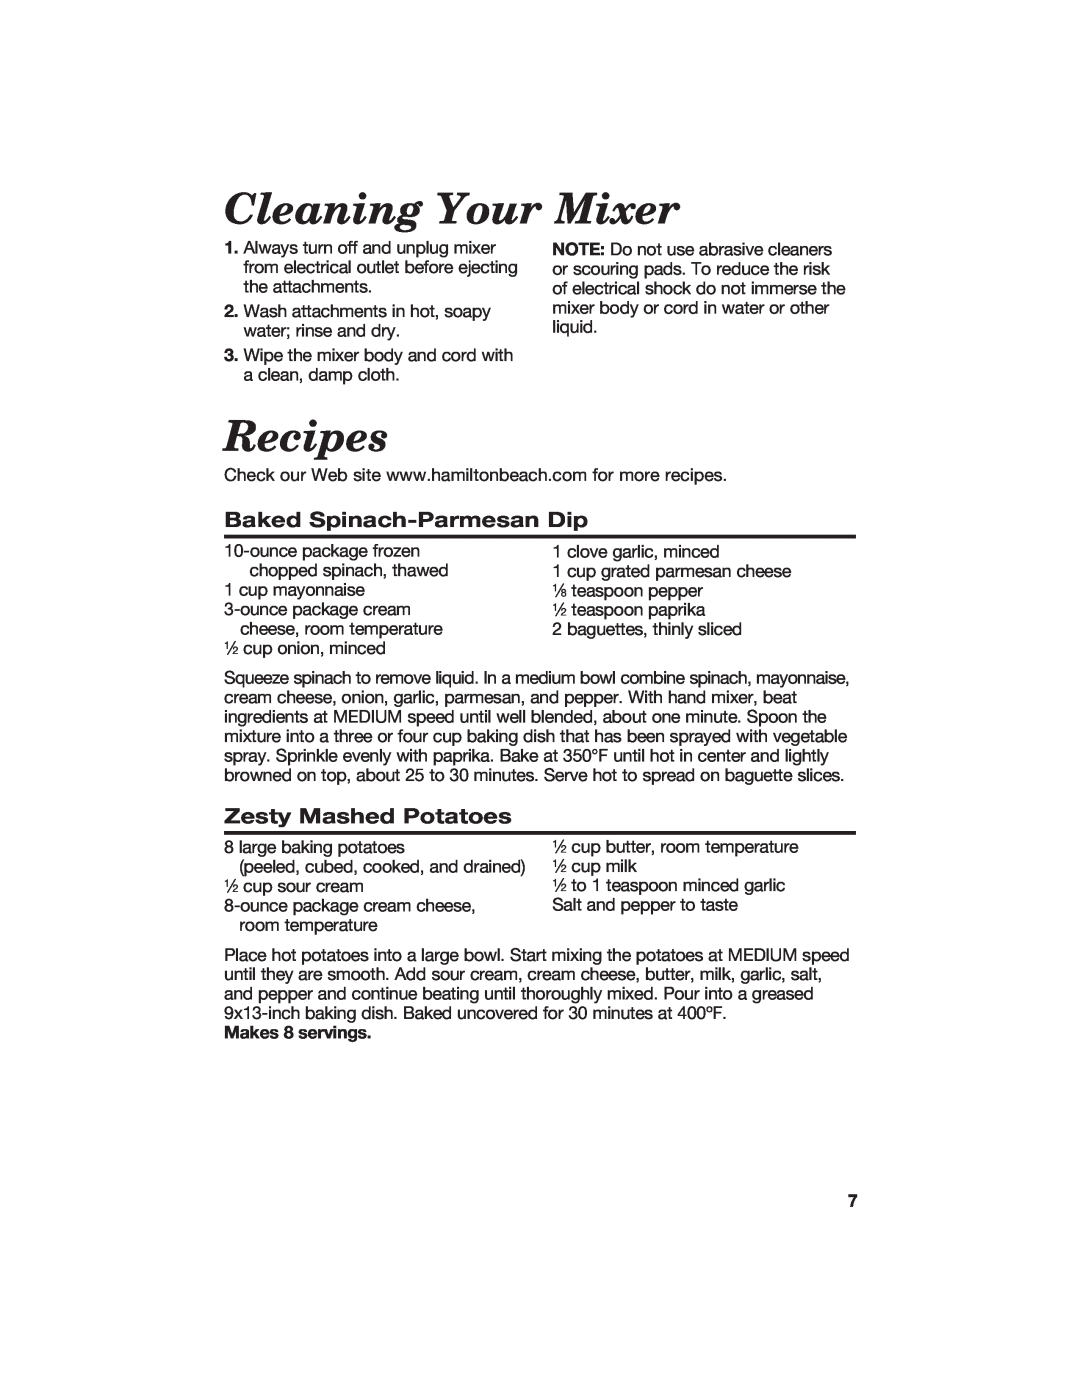 Hamilton Beach 840106200 Cleaning Your Mixer, Recipes, Baked Spinach-ParmesanDip, Zesty Mashed Potatoes, Makes 8 servings 